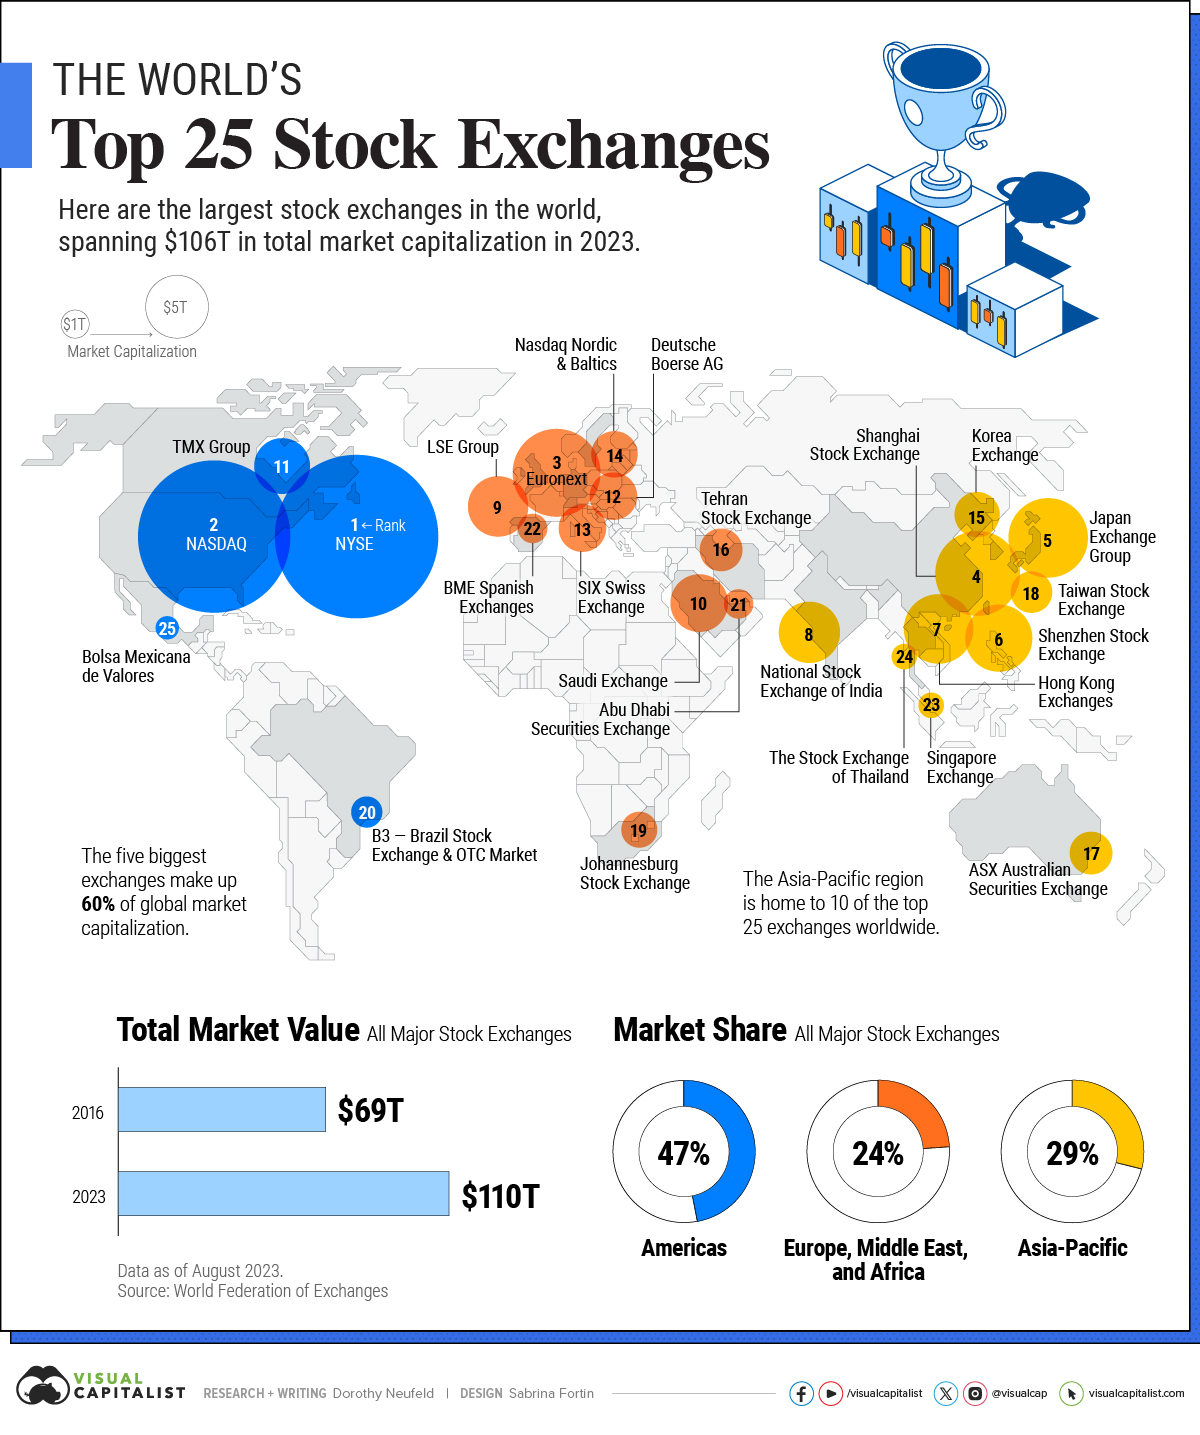 Largest-Stock-Markets-in-the-World-1.jpeg